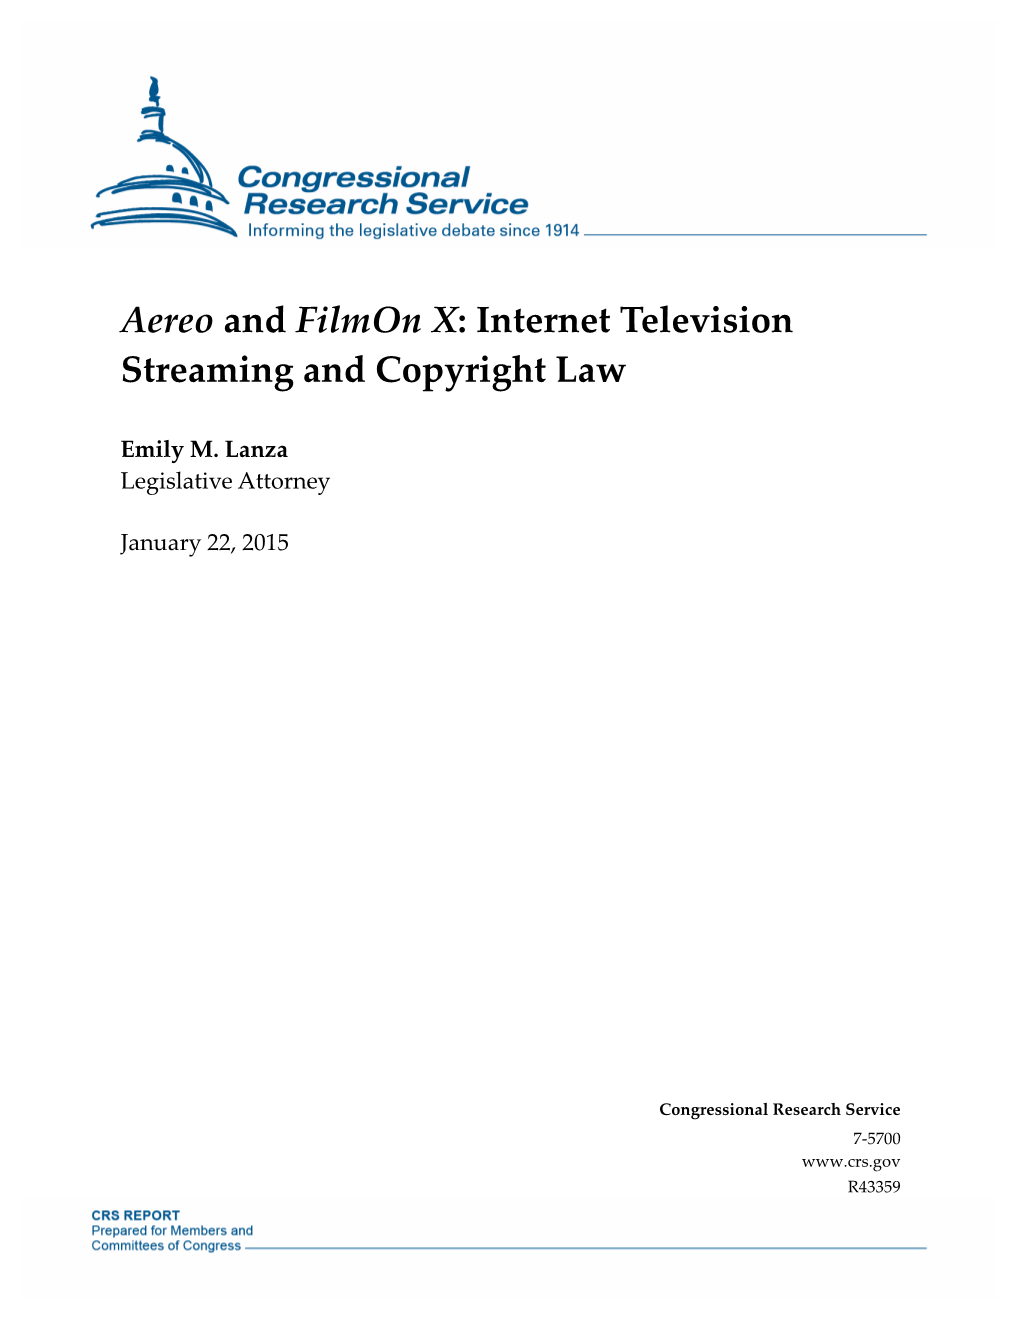 Aereo and Filmon X: Internet Television Streaming and Copyright Law